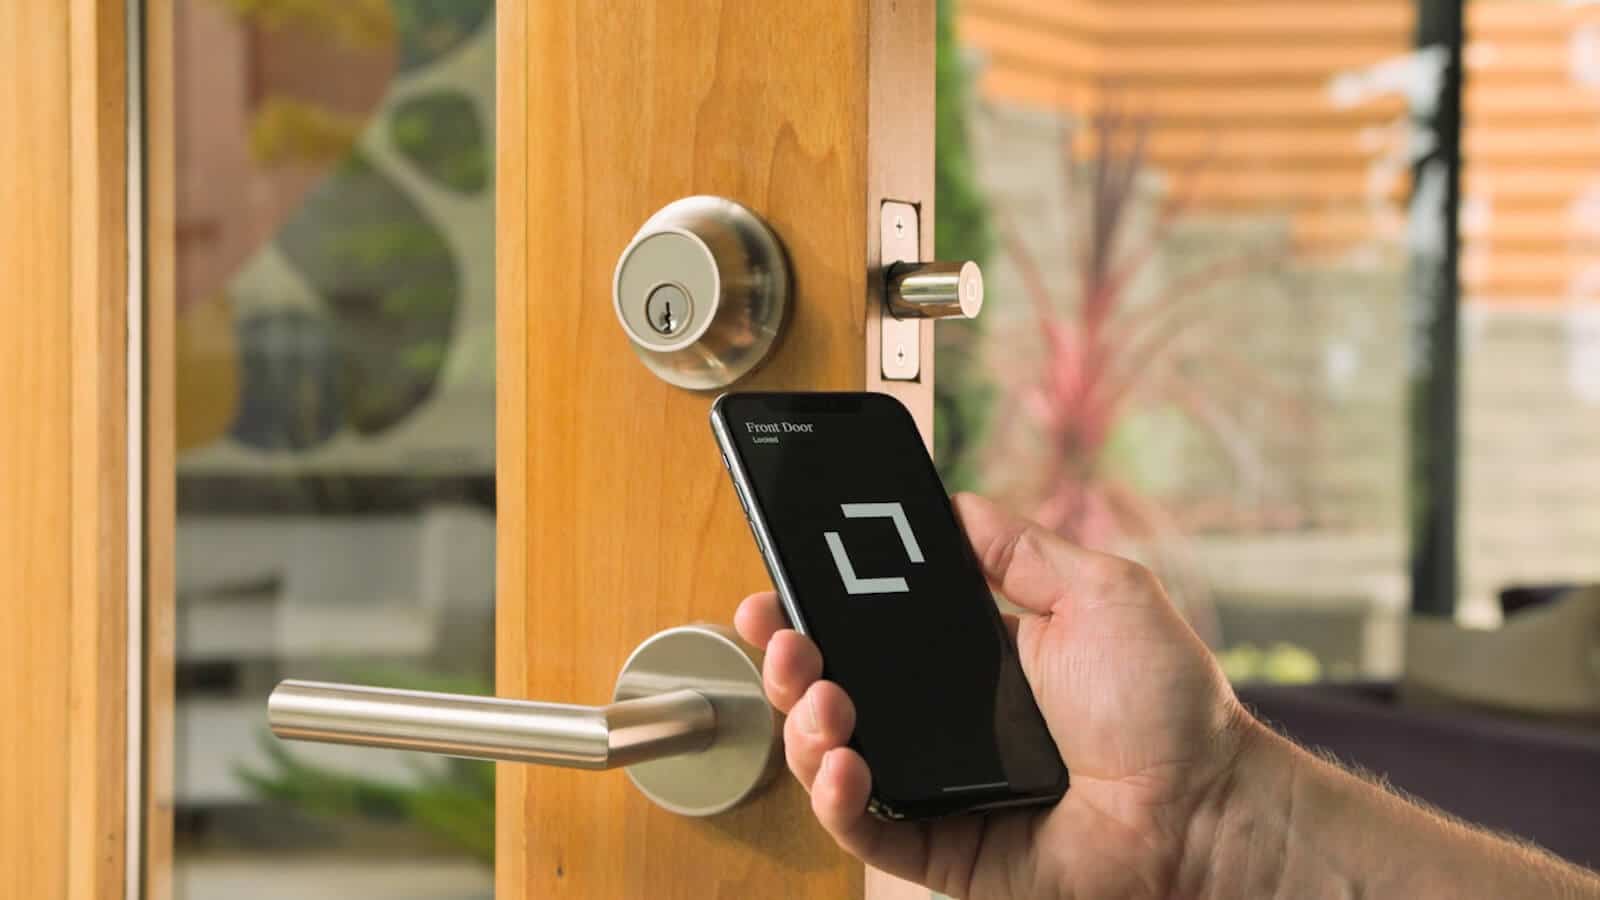 How To Open A Smart Lock Without Key